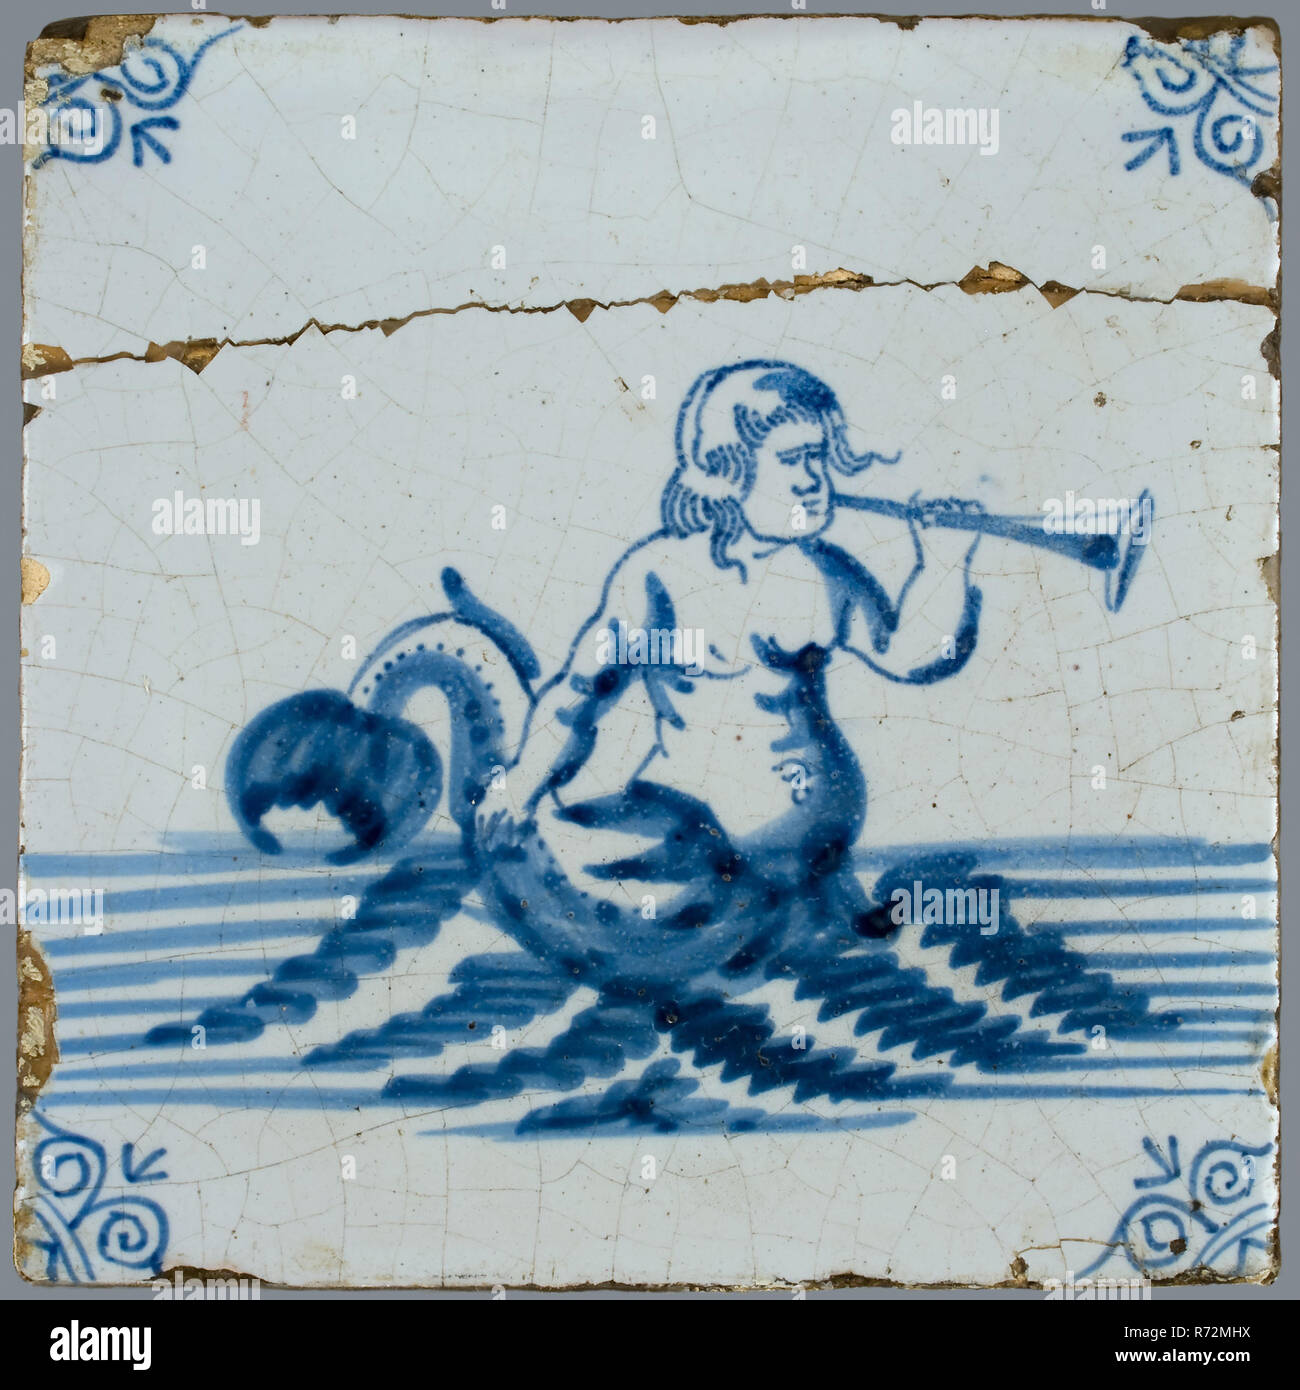 Scene tile, in tile field of eight, four high, two wide; blue, merman with trumpet, corner motif ox's head, tiled field wall tile tile material ceramics pottery glaze tin glaze, baked 2x glazed painted Blue on white. Tile in tile field of eight pieces four high two wide mythology Stock Photo